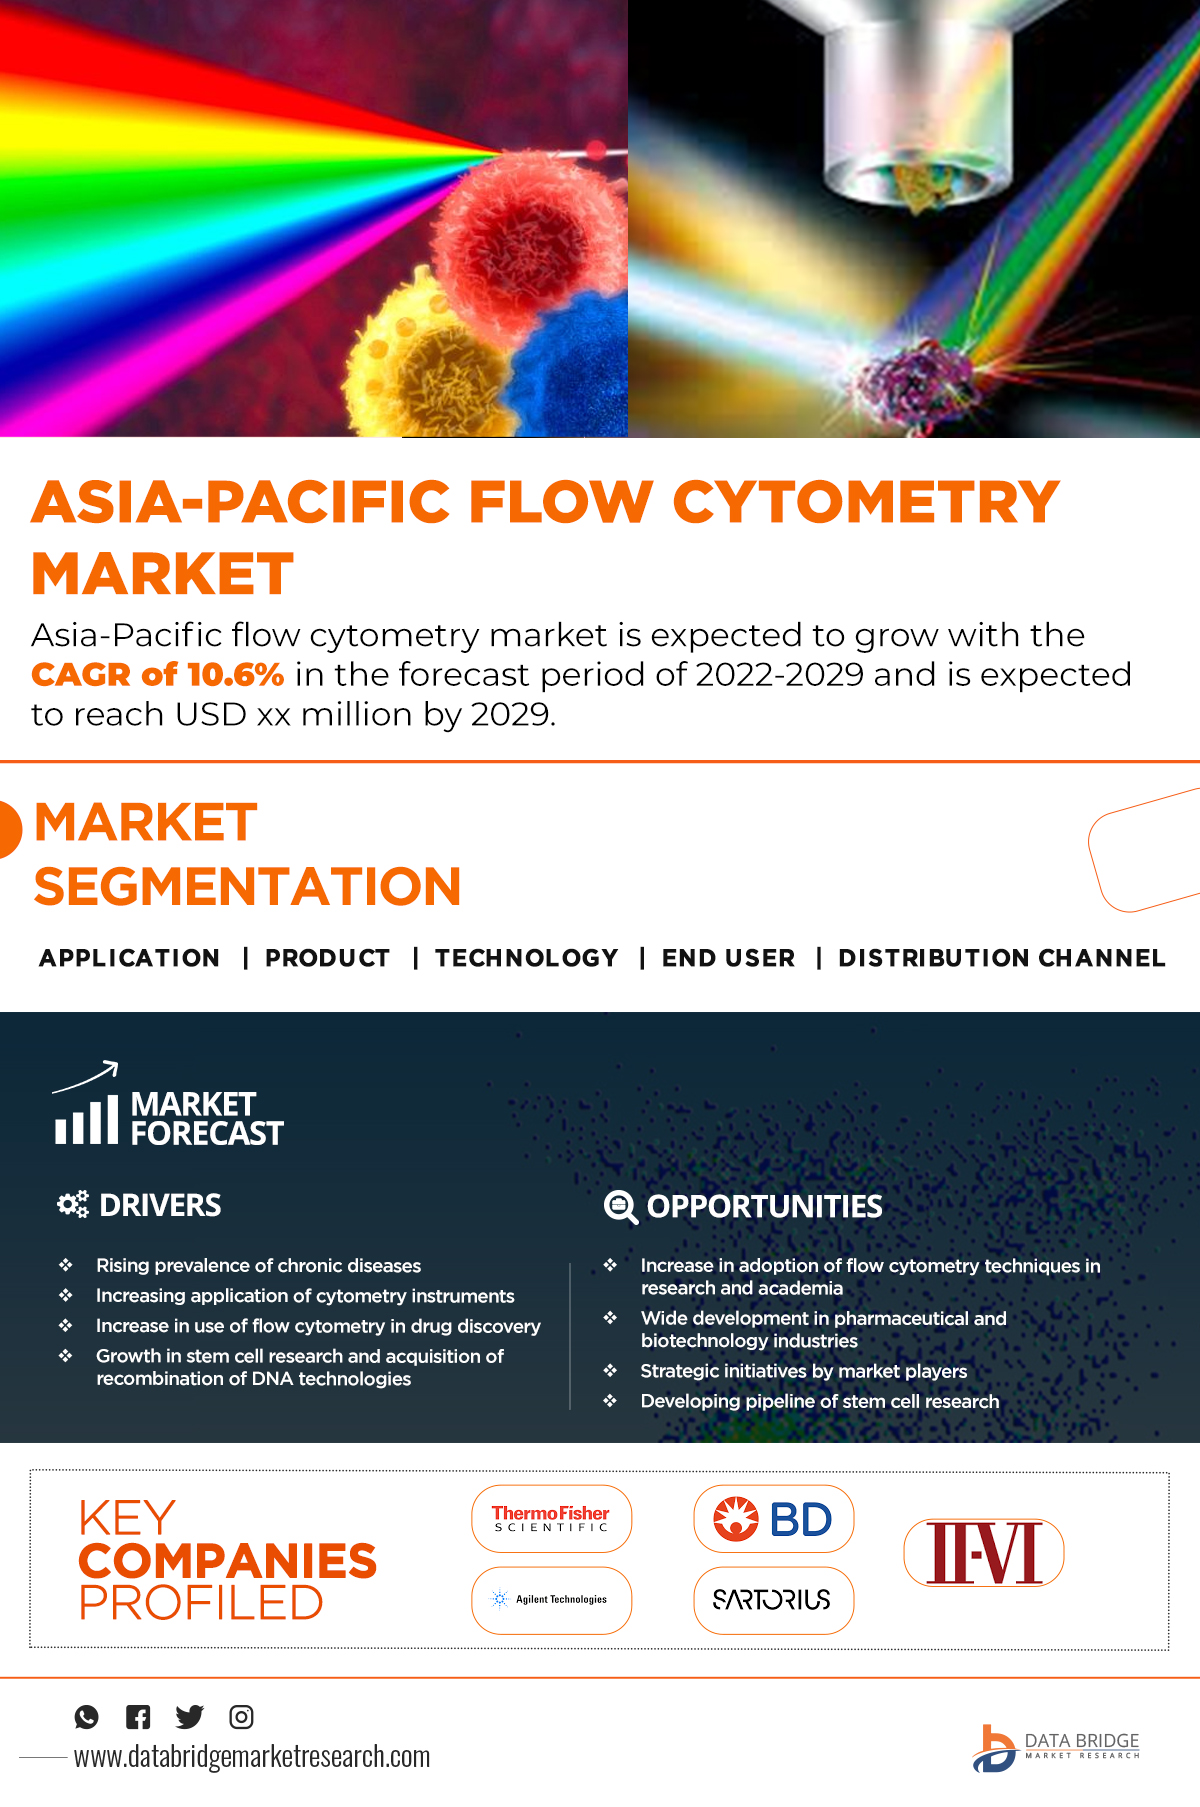 Asia-Pacific Flow Cytometry Market